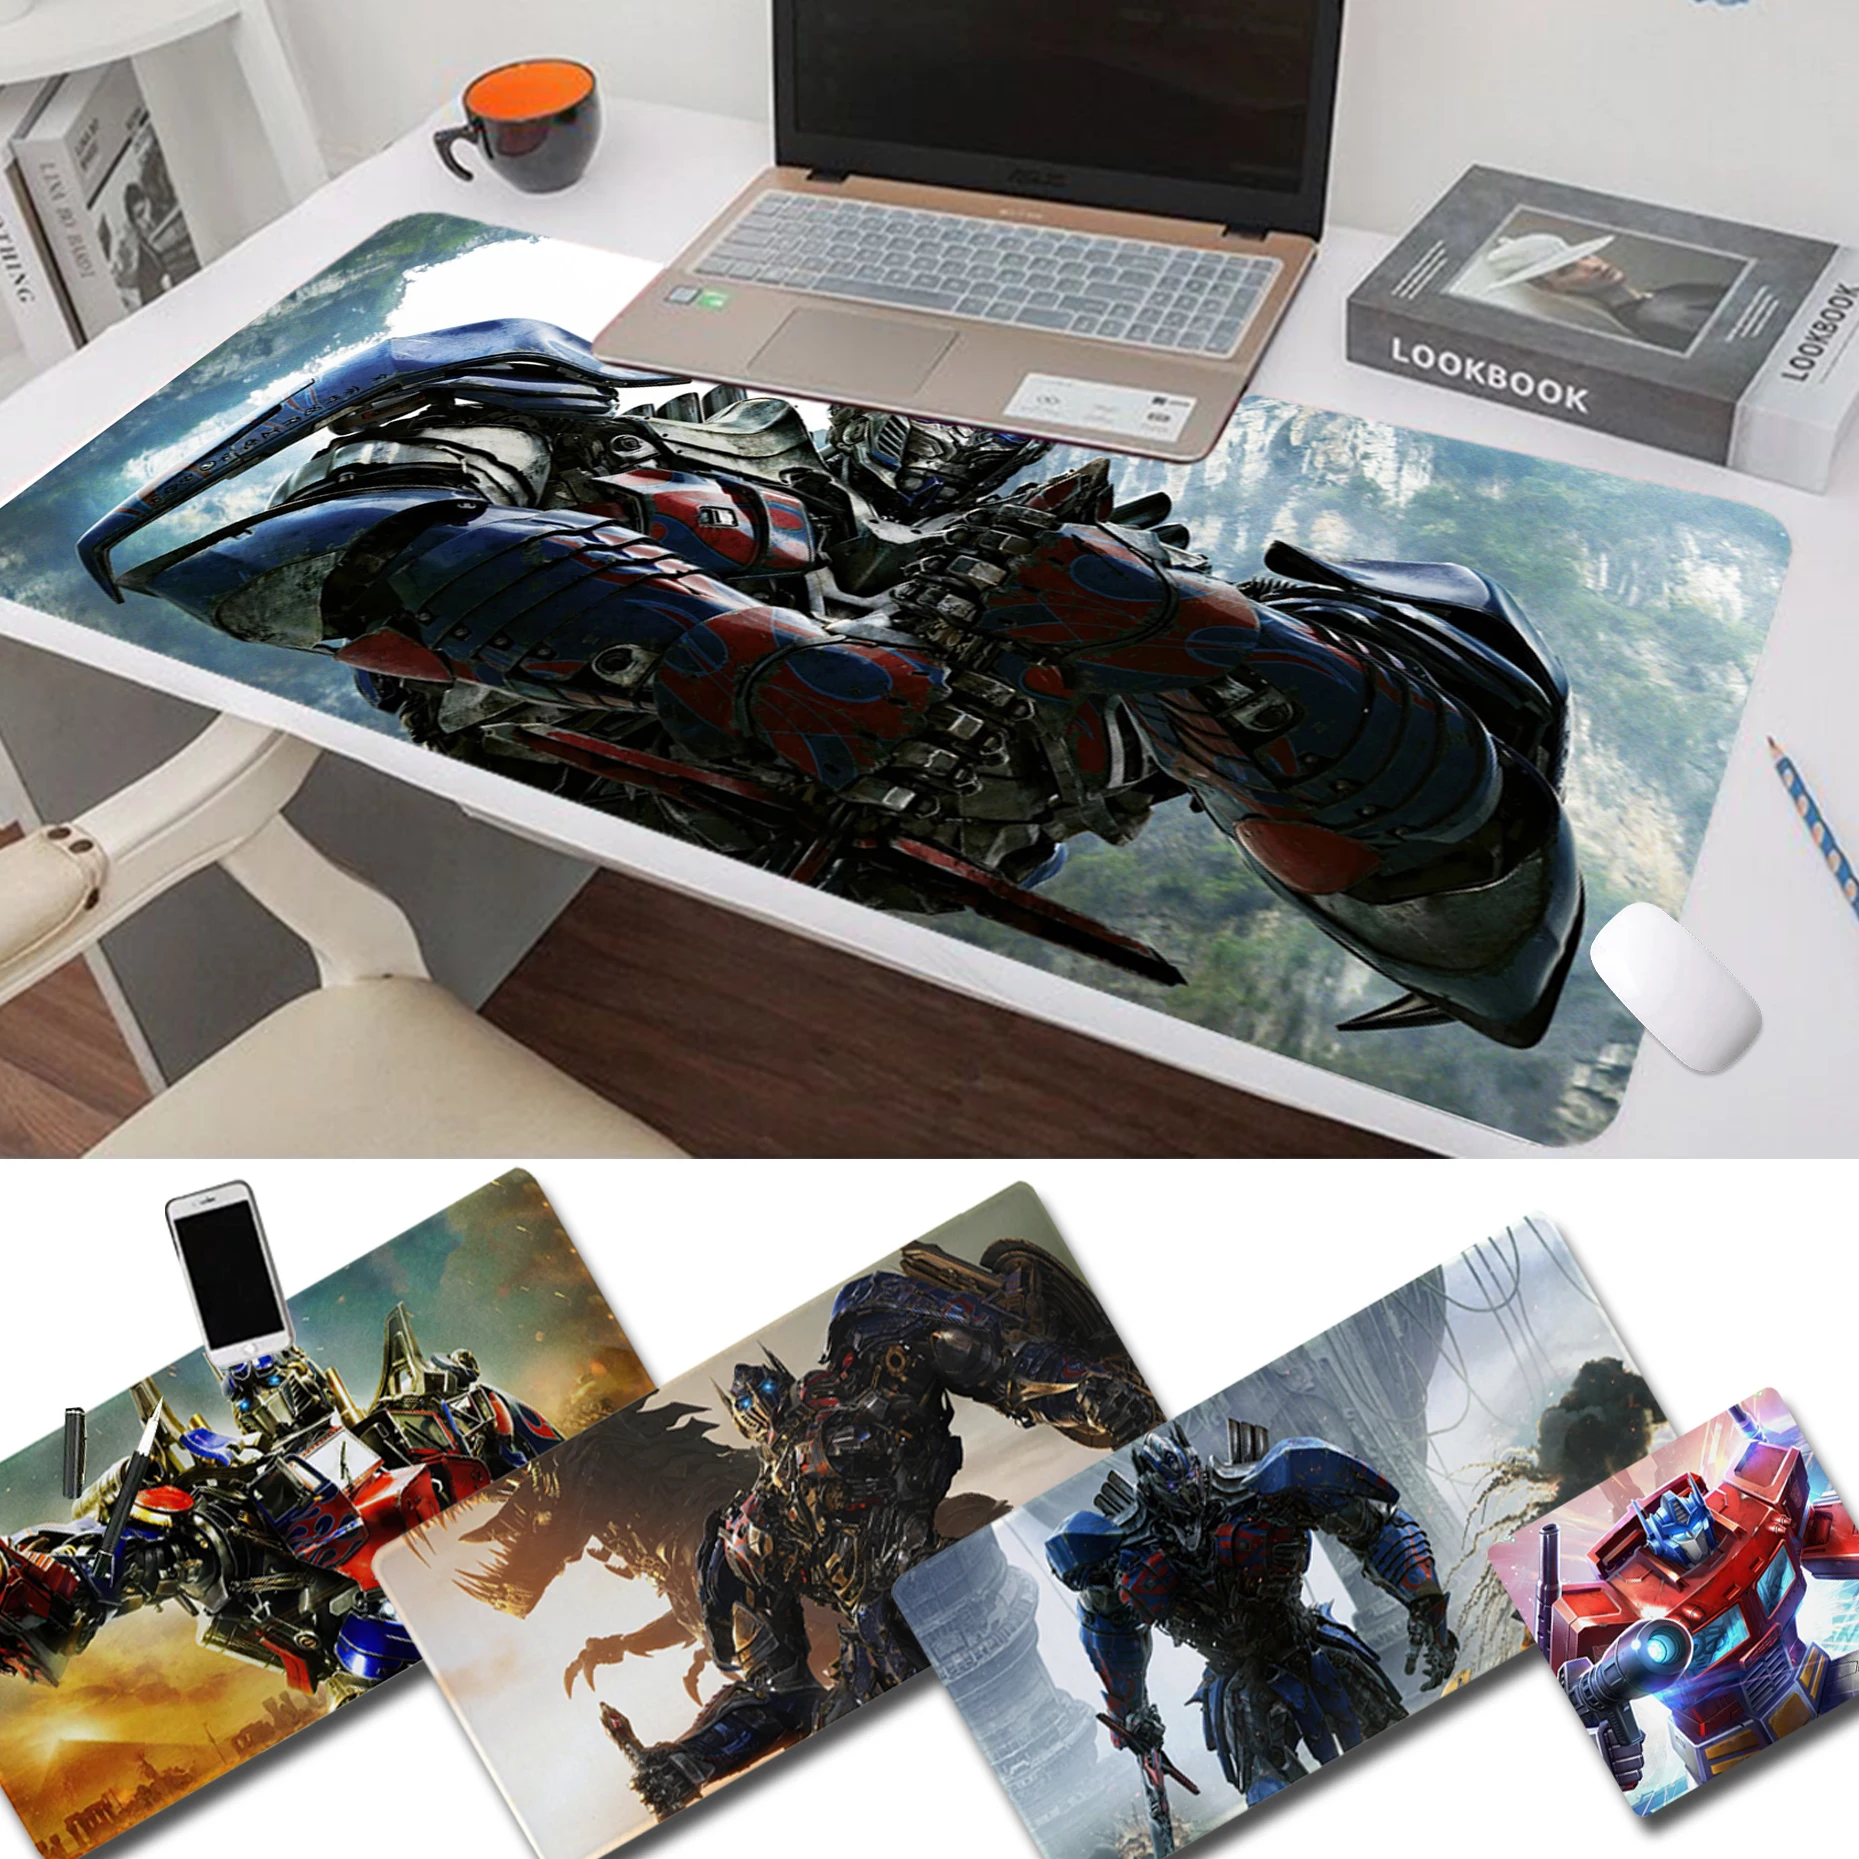 

Transformers Autobot (1) Mousepad Custom Skin gamer play mats Mousepad Size for Customized mouse pad for CS GO PUBG